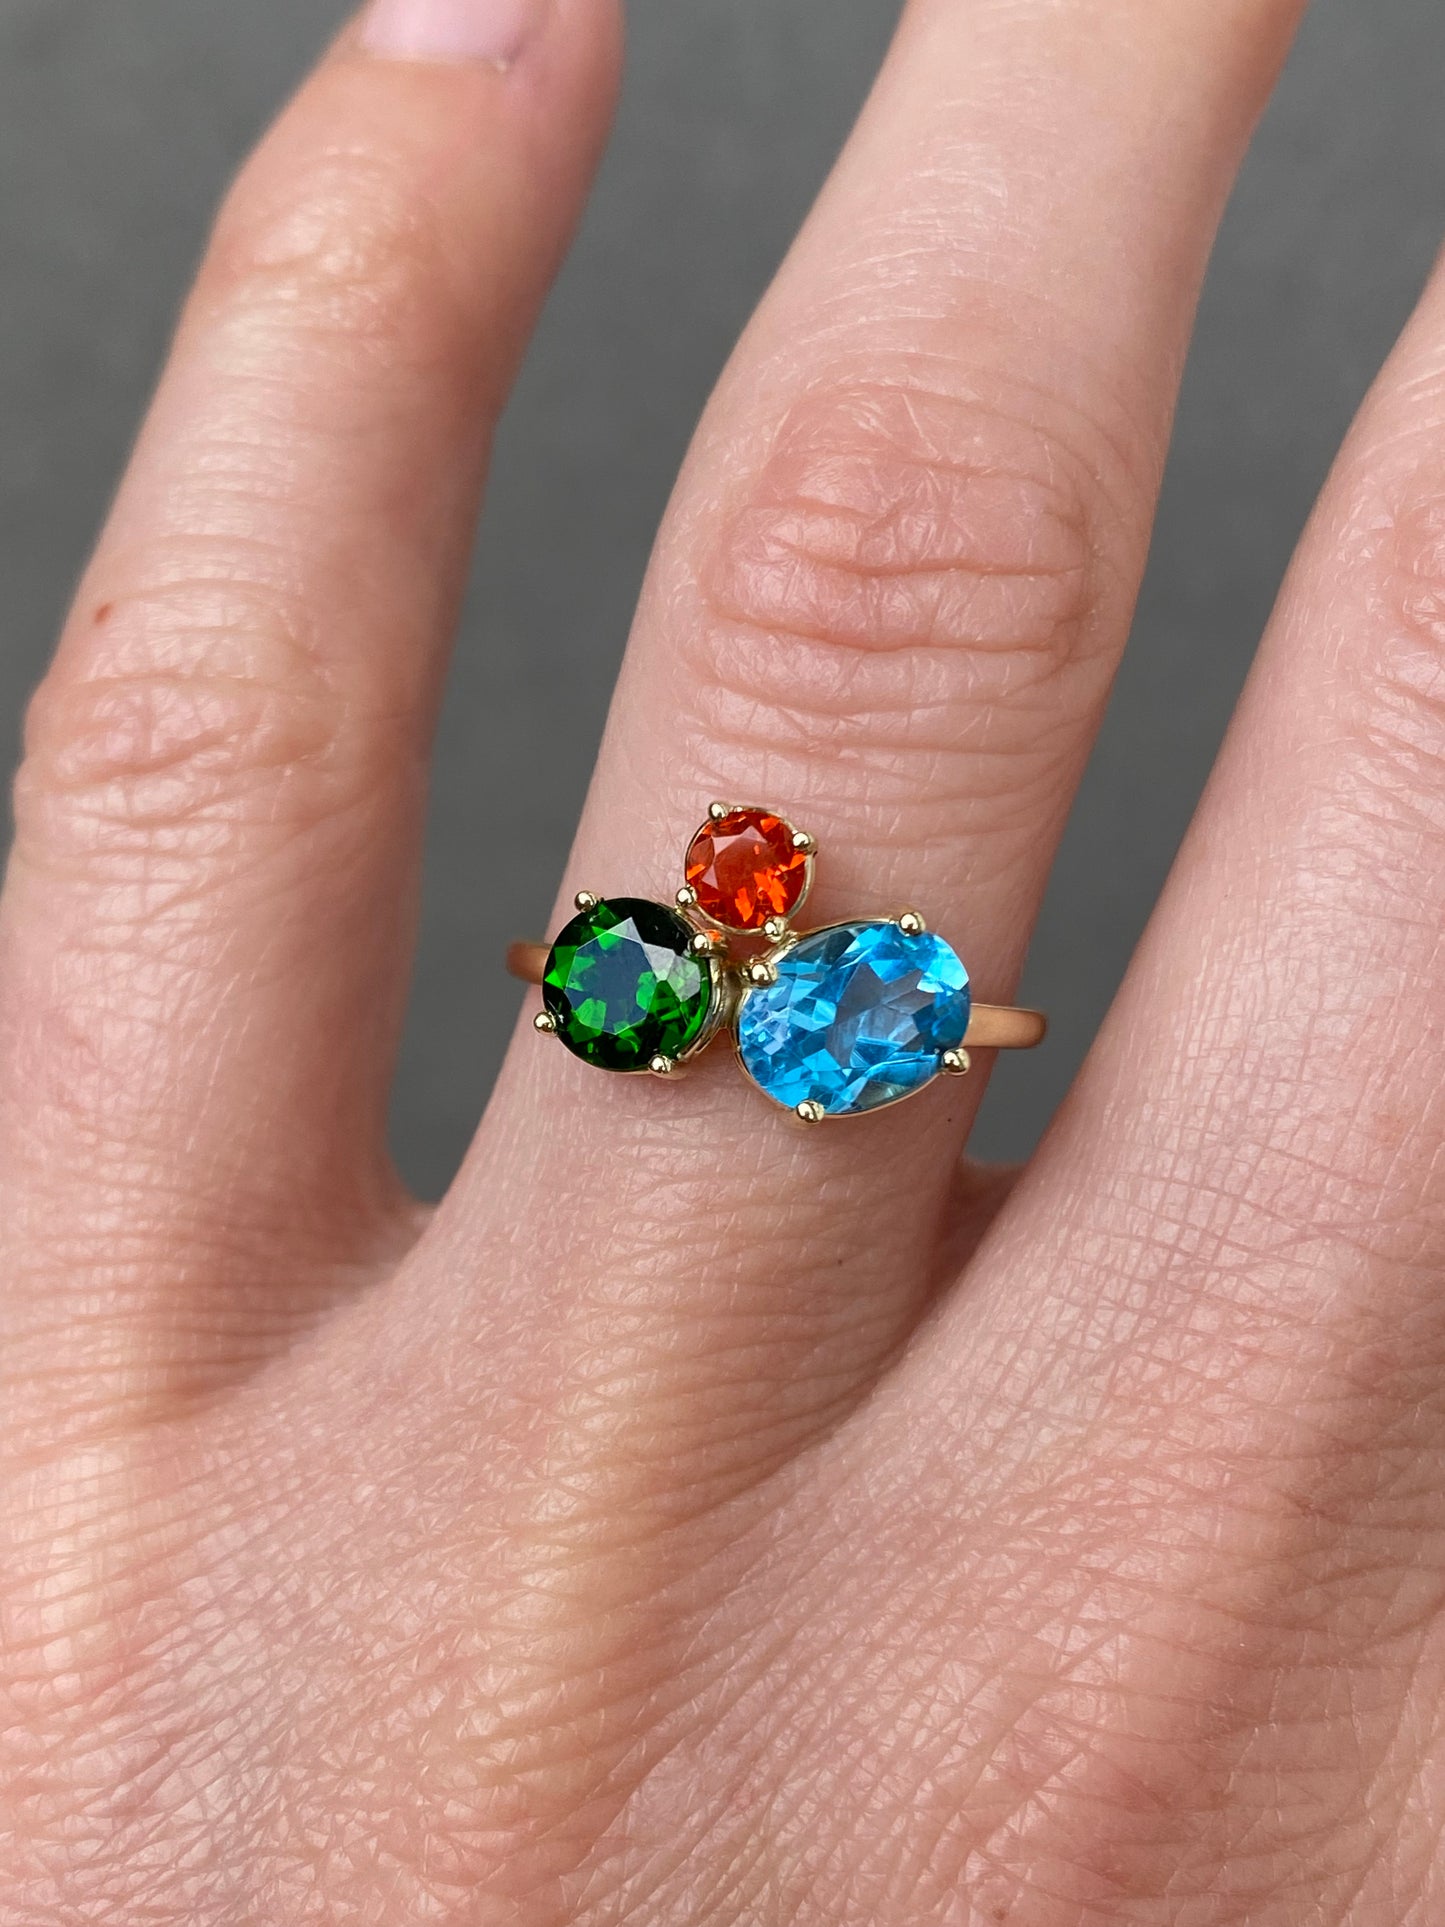 Mosaic ring Chrome Diopside, Fire Opal and Blue Topaz in 14k yellow gold